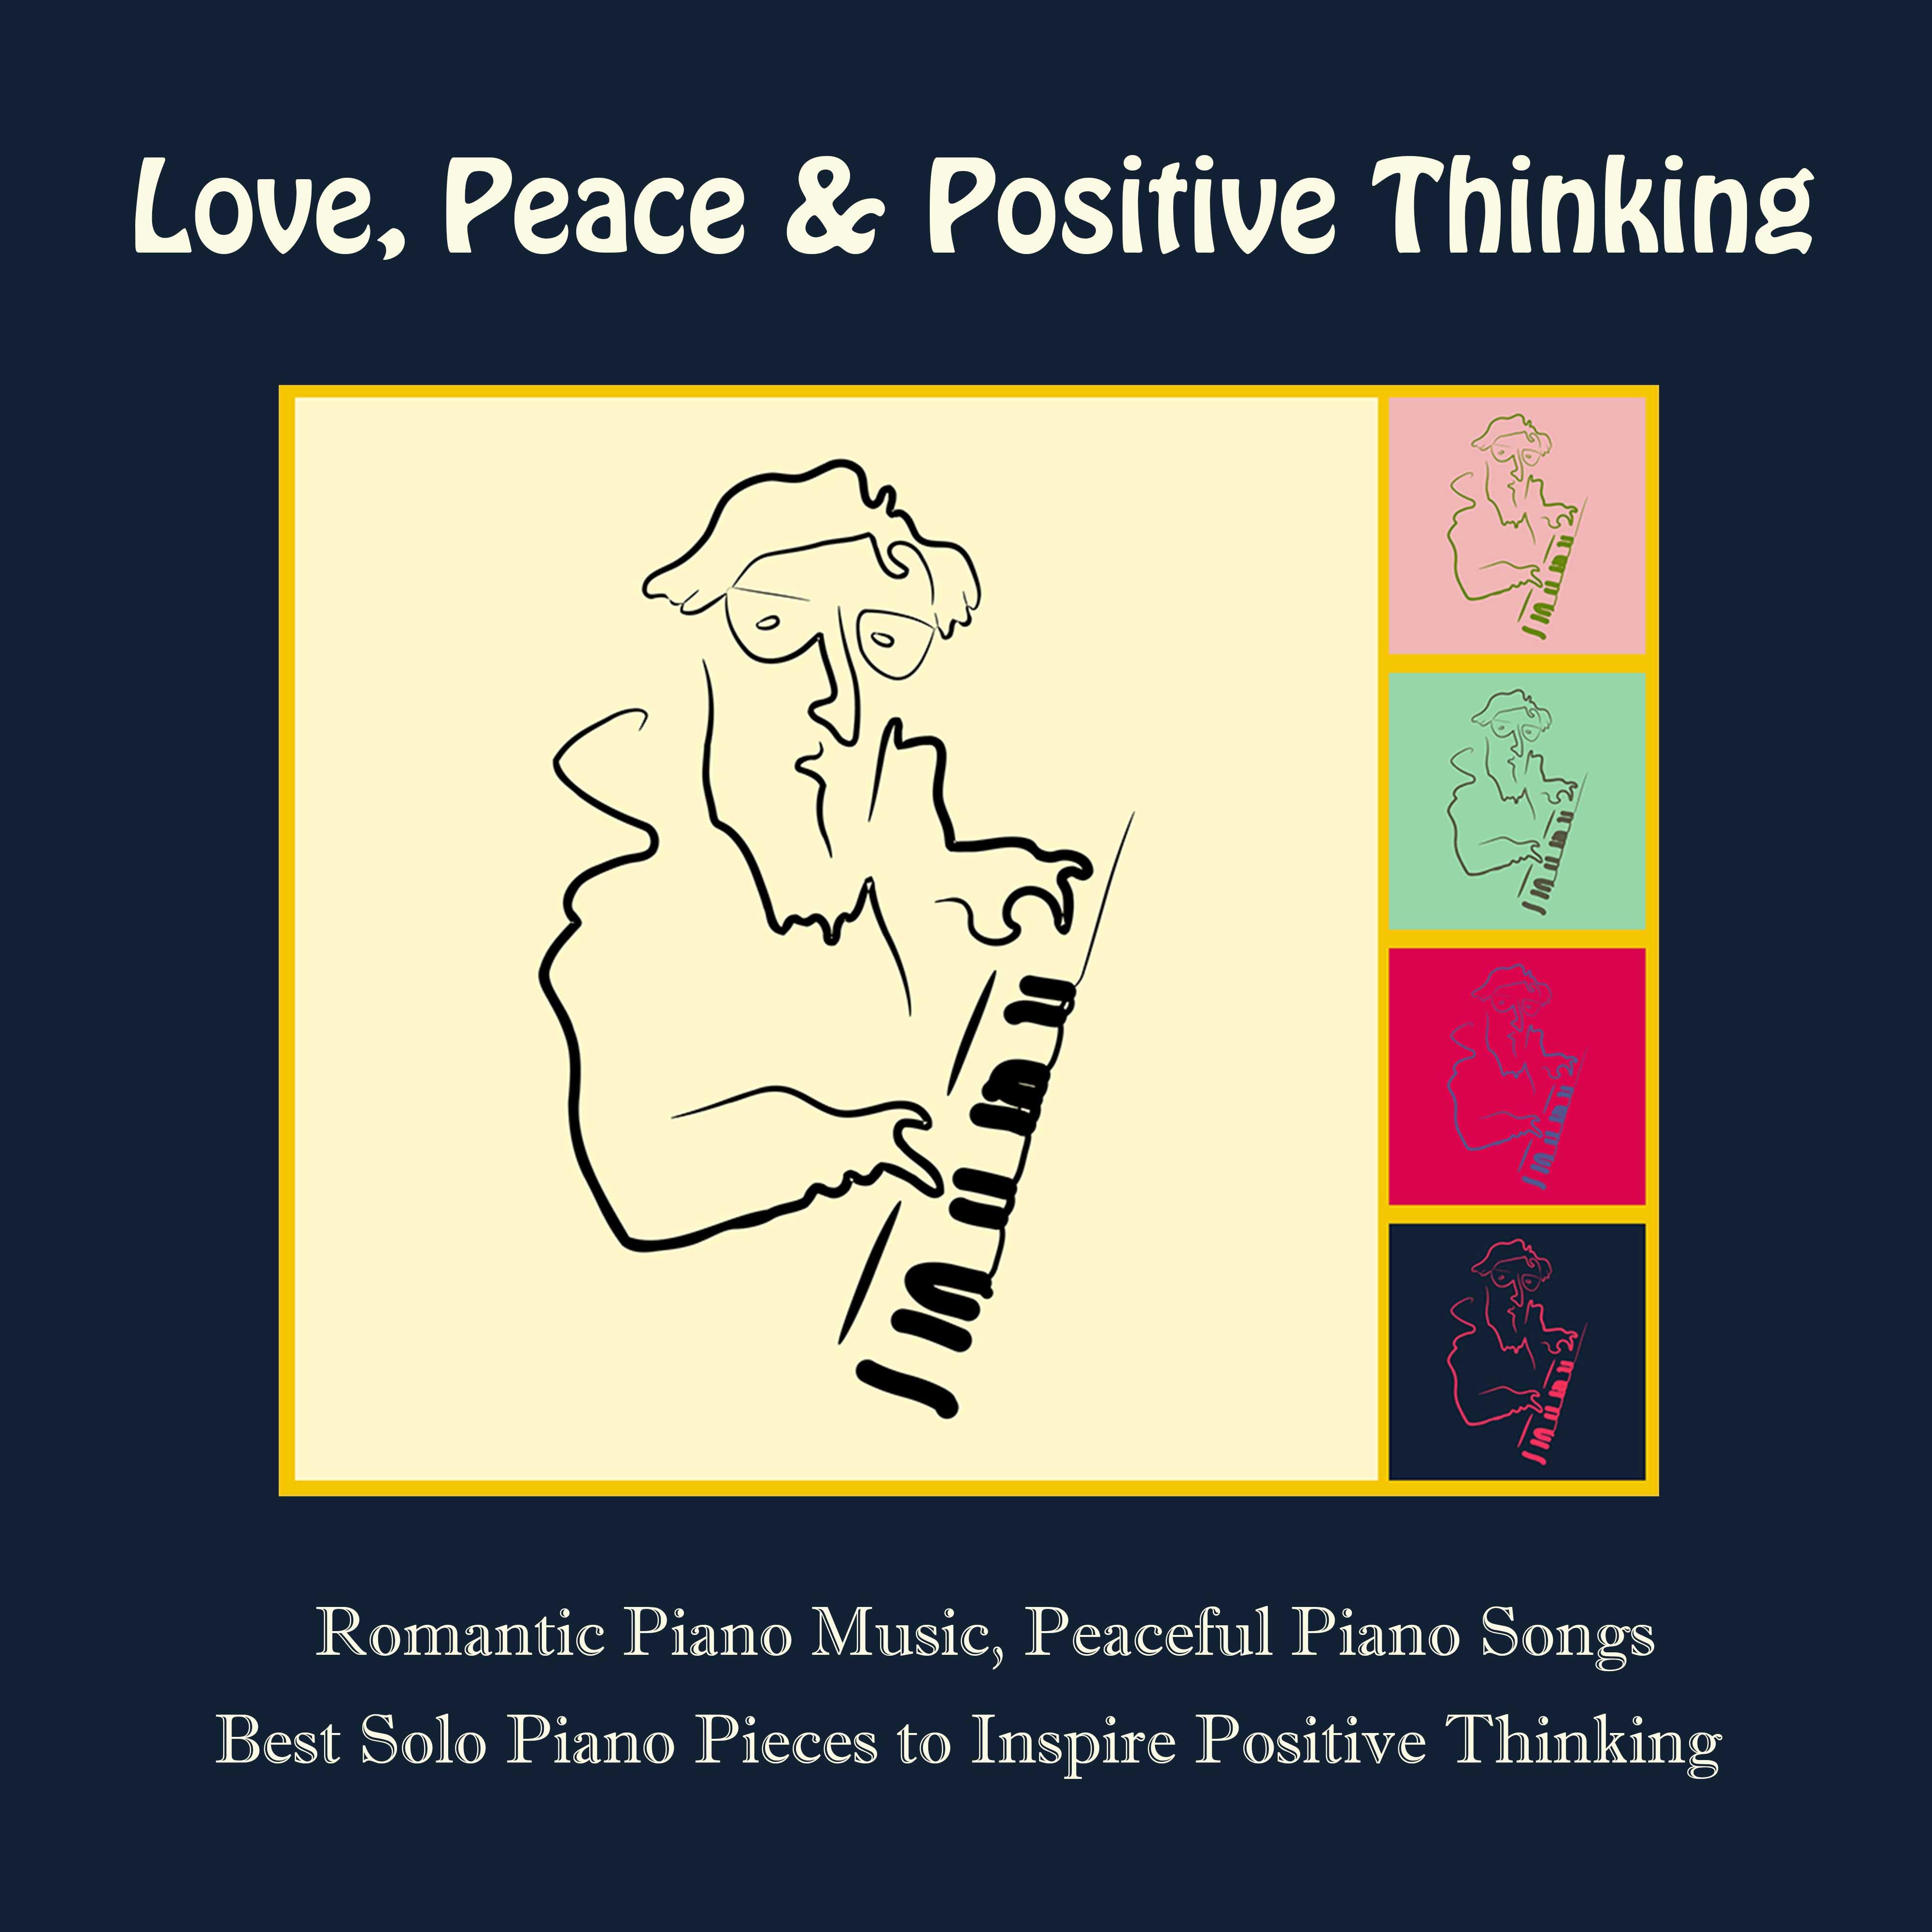 Love, Peace & Positive Thinking: Romantic Piano Music, Peaceful Piano Songs & Best Solo Piano Pieces to Inspire Positive Thinking